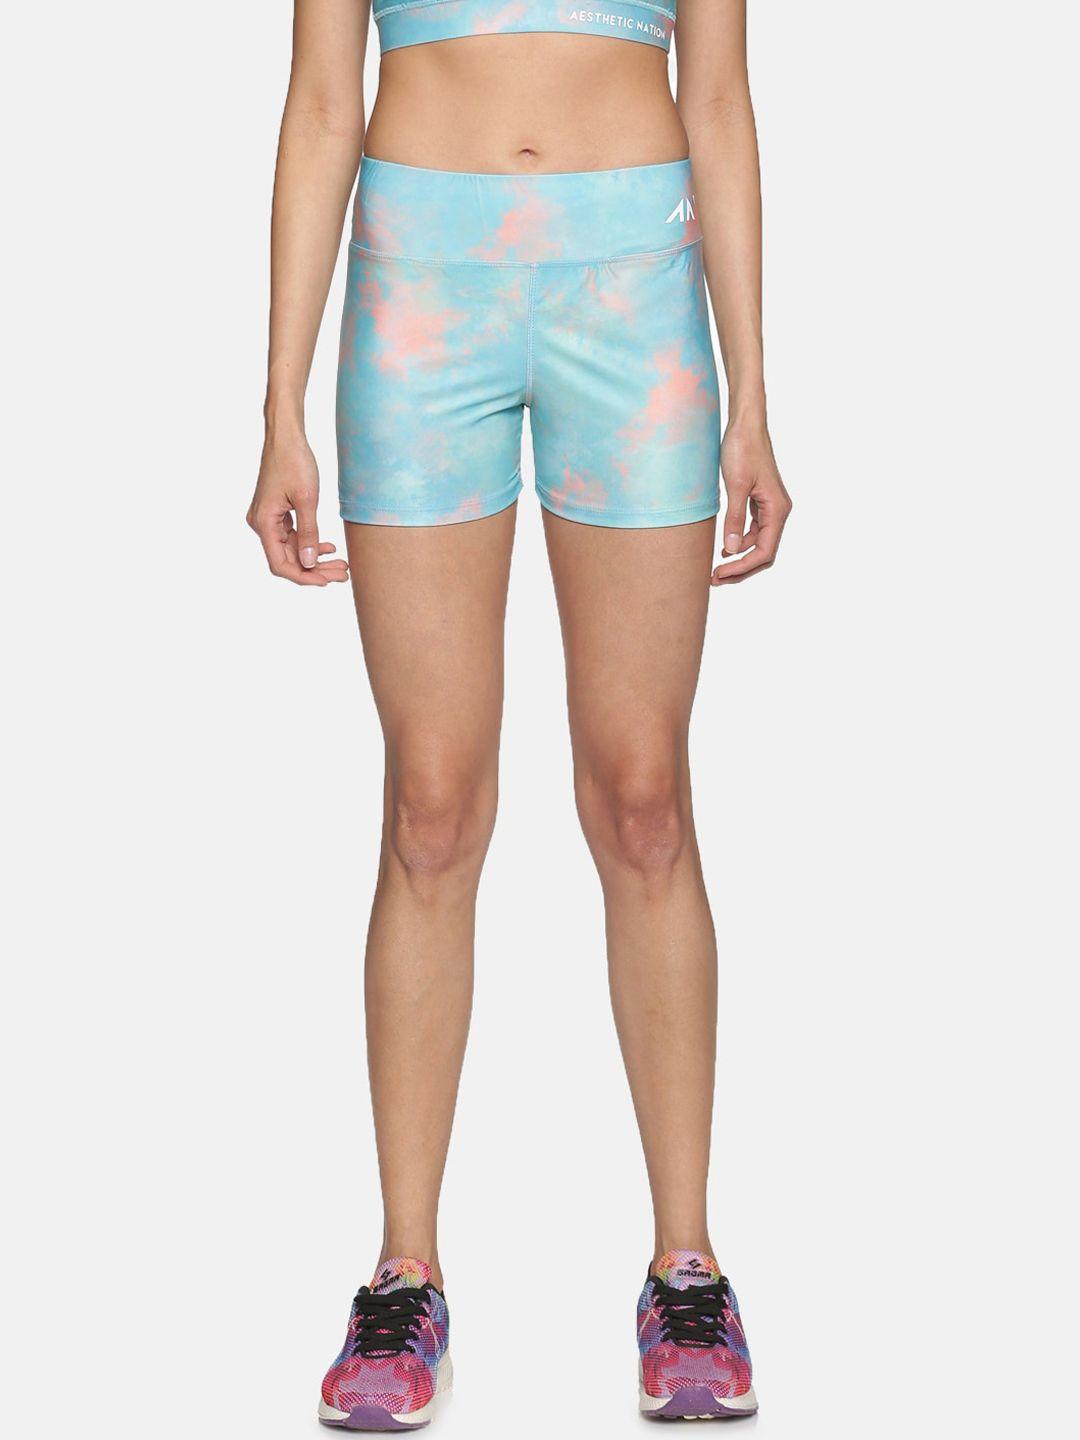 aesthetic-nation-women-sea-green-printed-slim-fit-high-rise-training-or-gym-sports-shorts